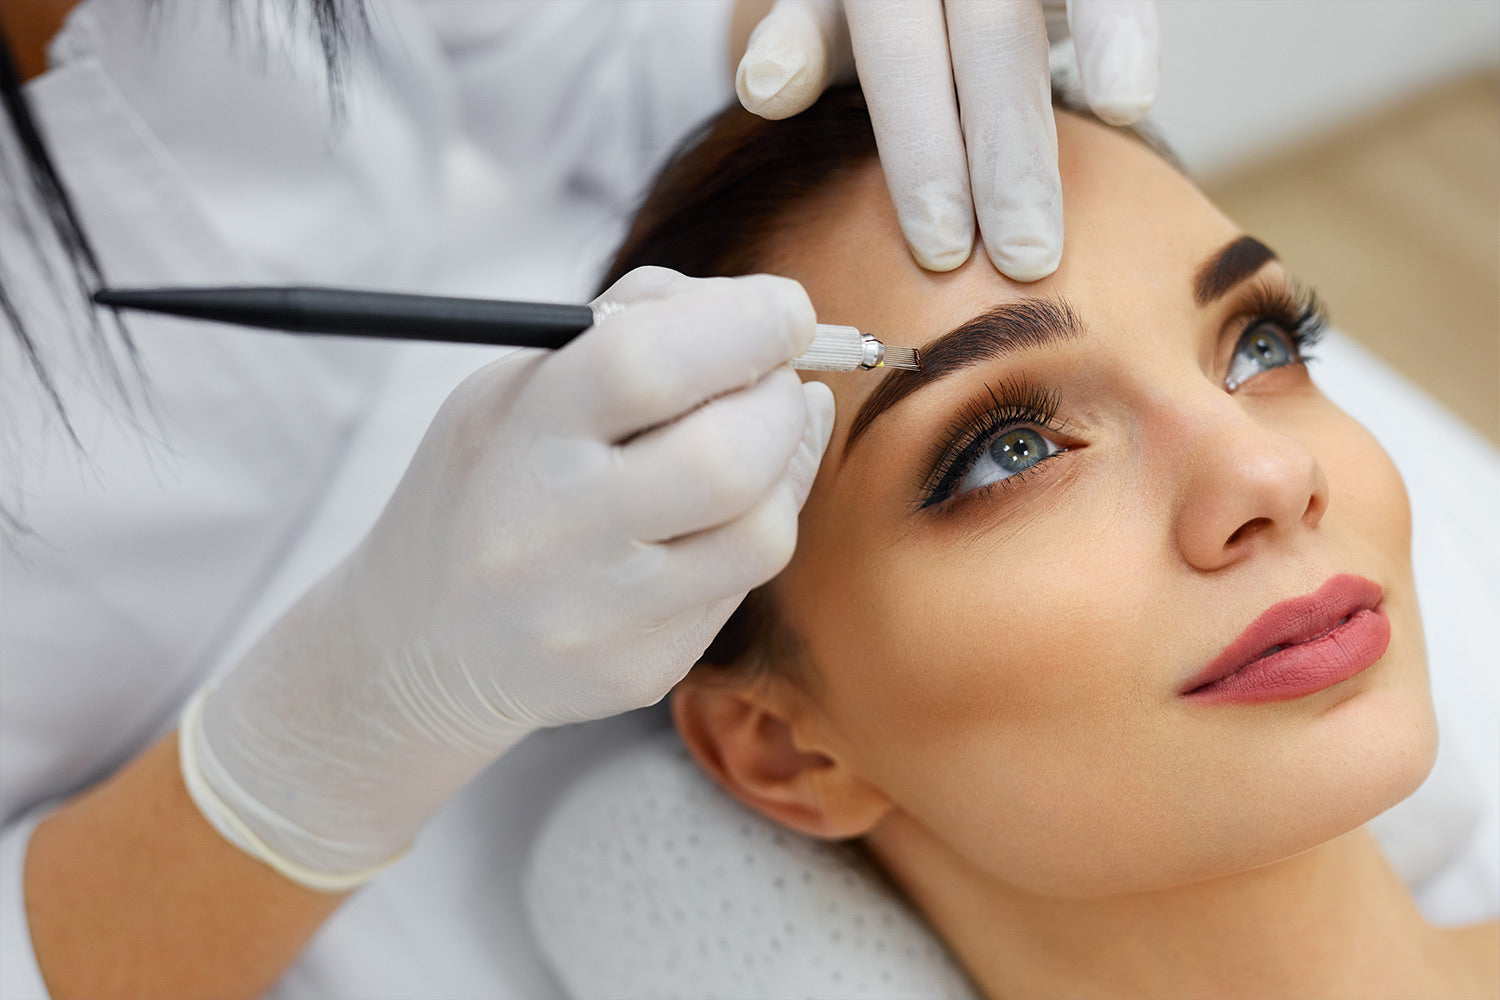 Eyebrow Implants: Are They Really Worth It?